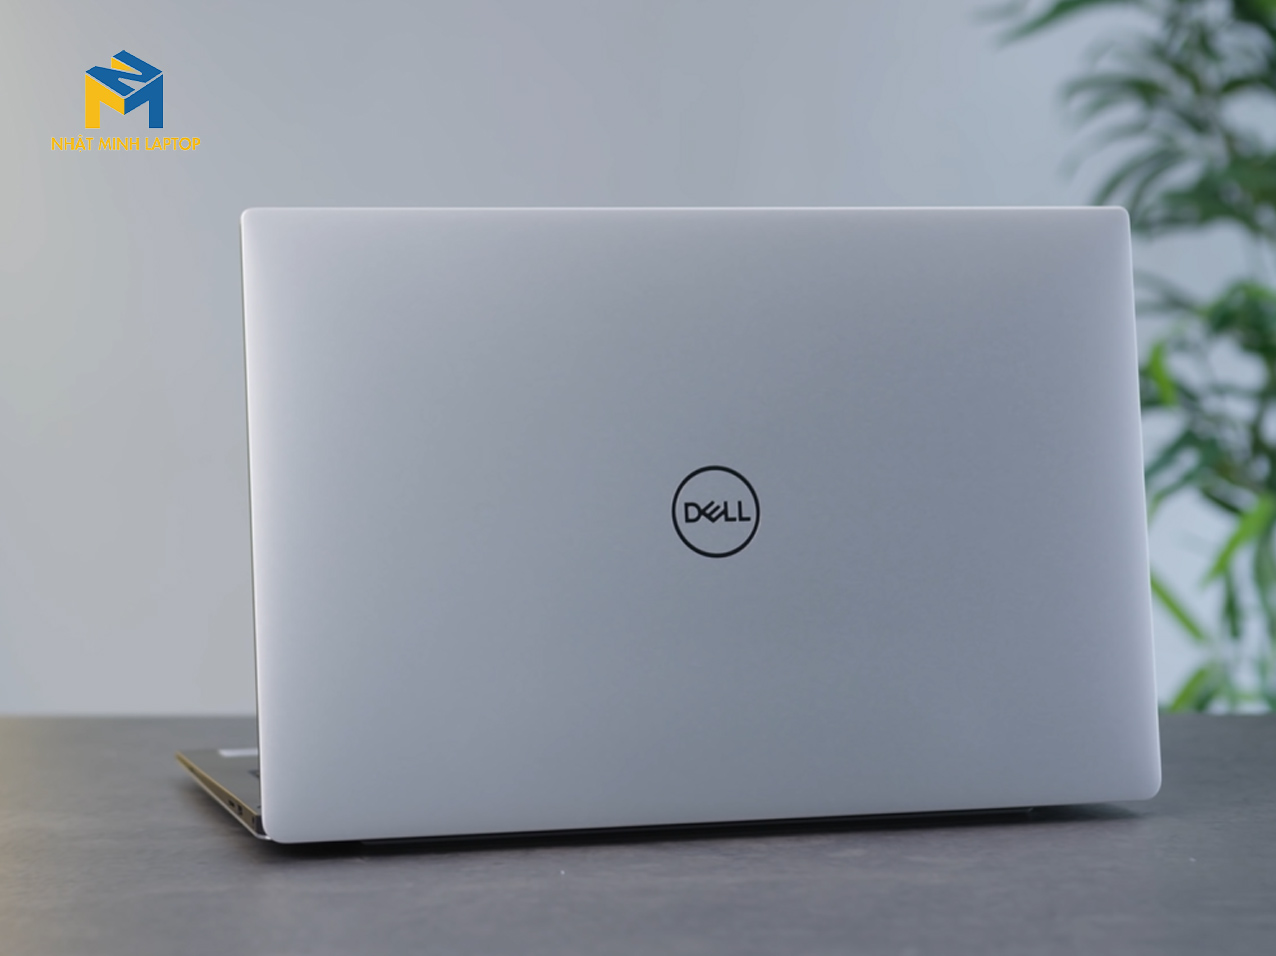 Dell XPS 13 7390 (2020)